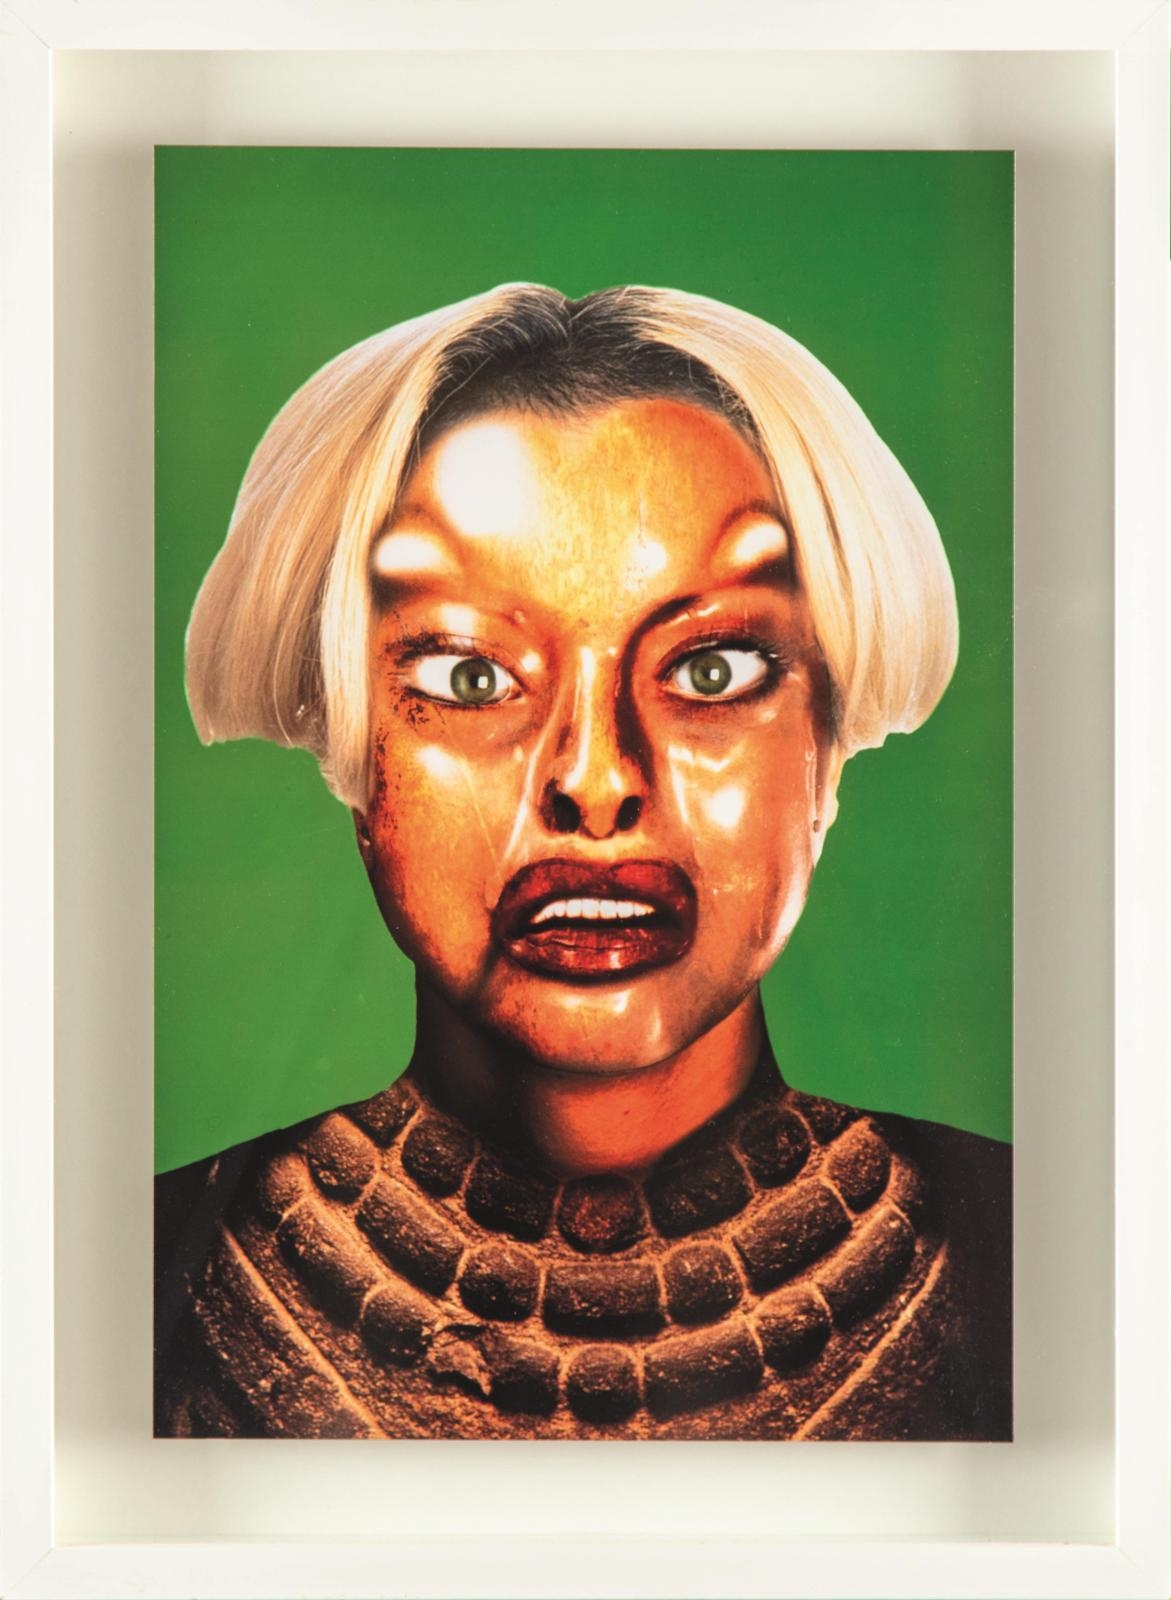 Défiguration-Refiguration - Sel-hybridation Précolombienne n°15 by Orlan, 1998